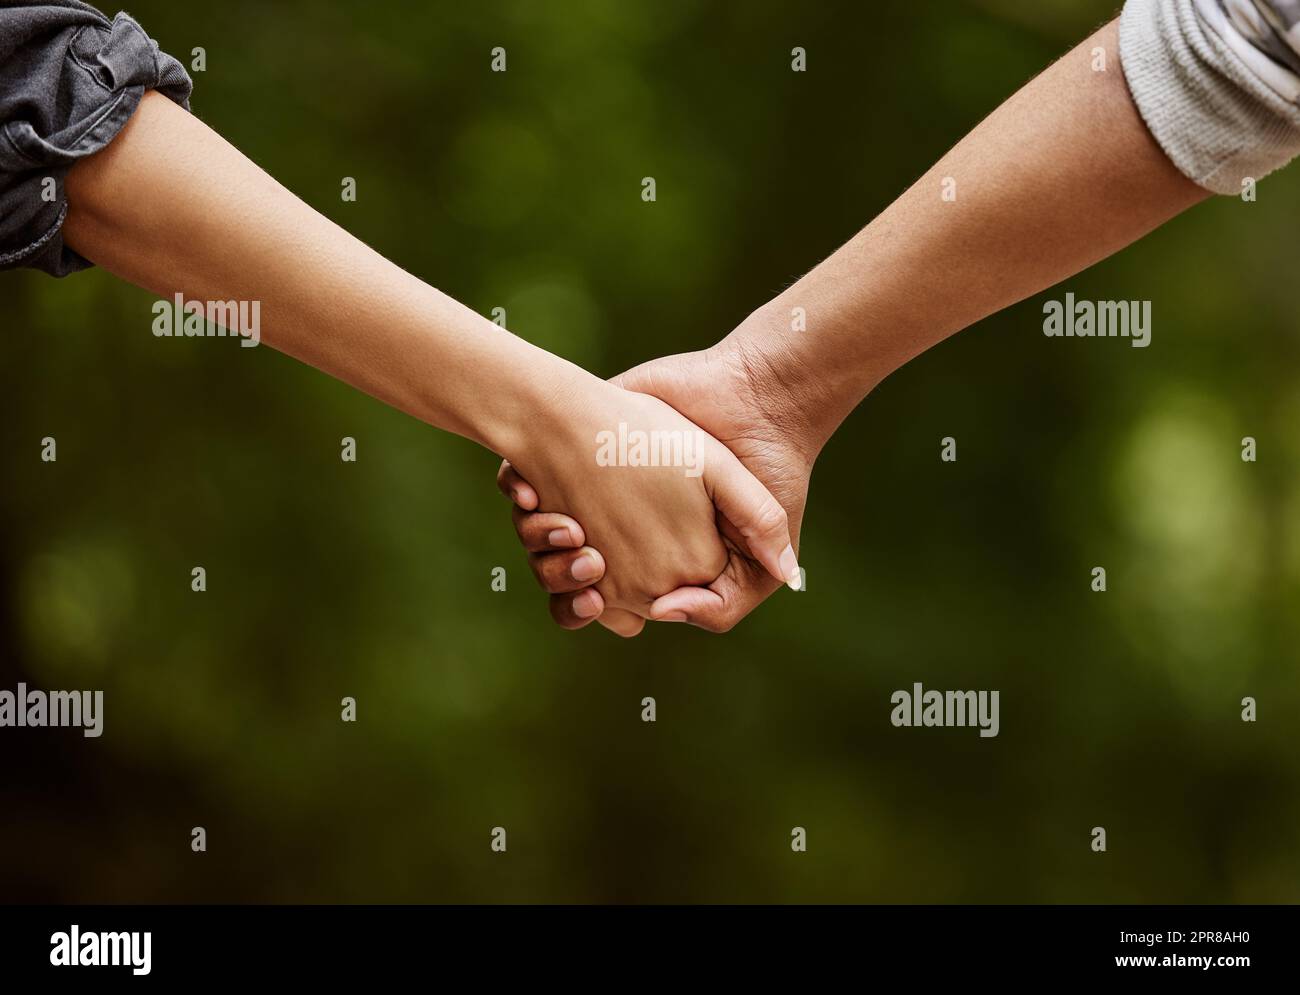 A walk on the wild side. Closeup shot of an unrecognizable couple walking hand in hand through the wilderness. Stock Photo